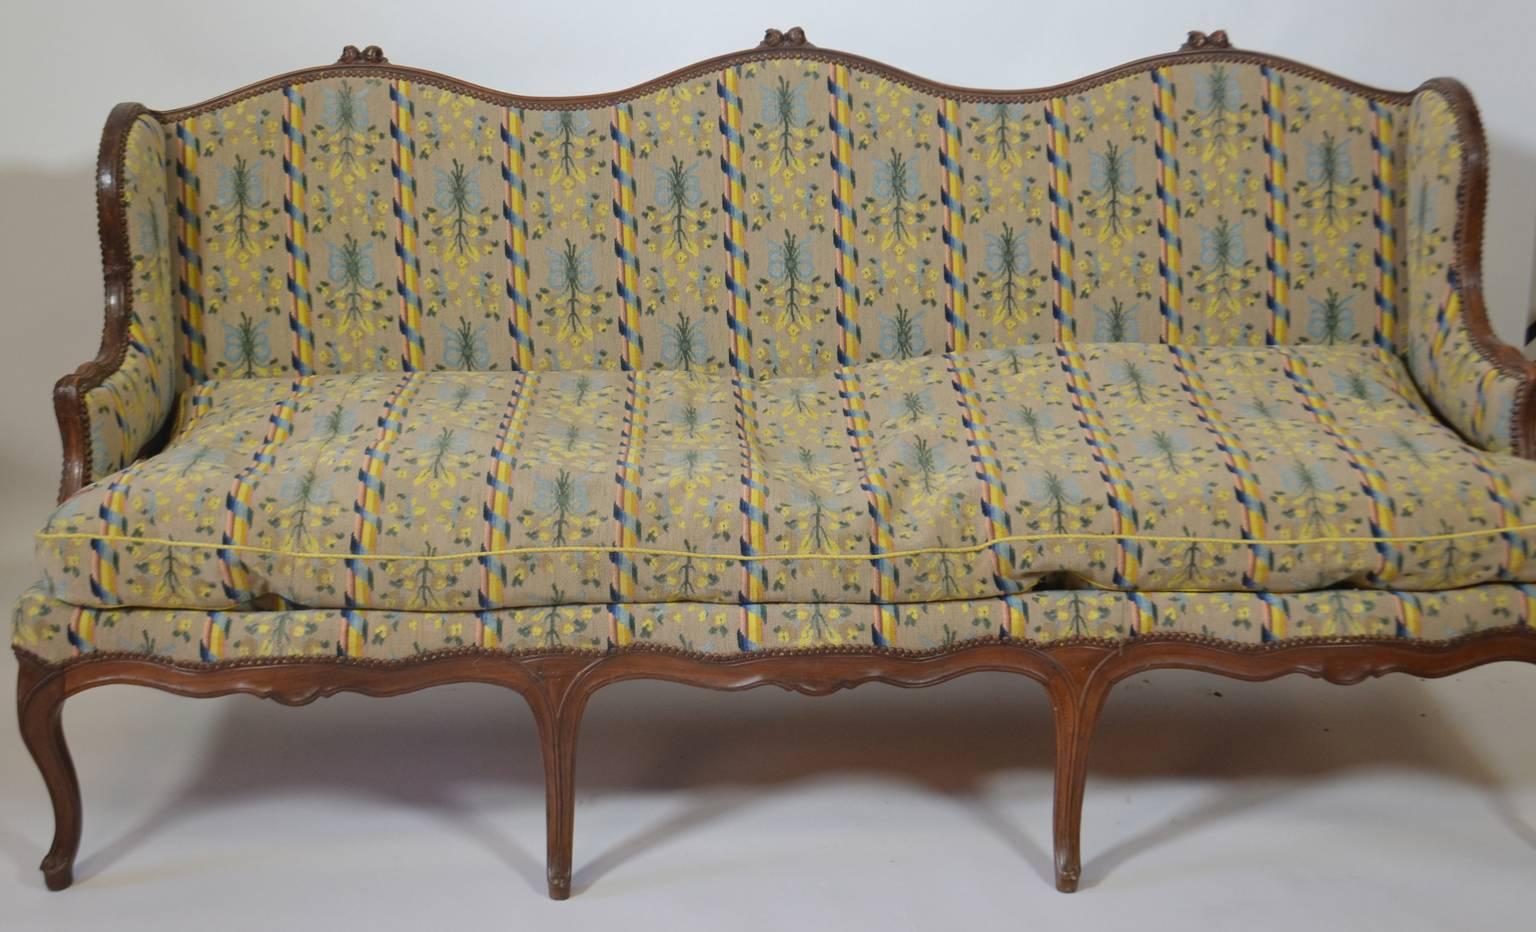 Louis XV period canapé in walnut with antique petit-point covering.